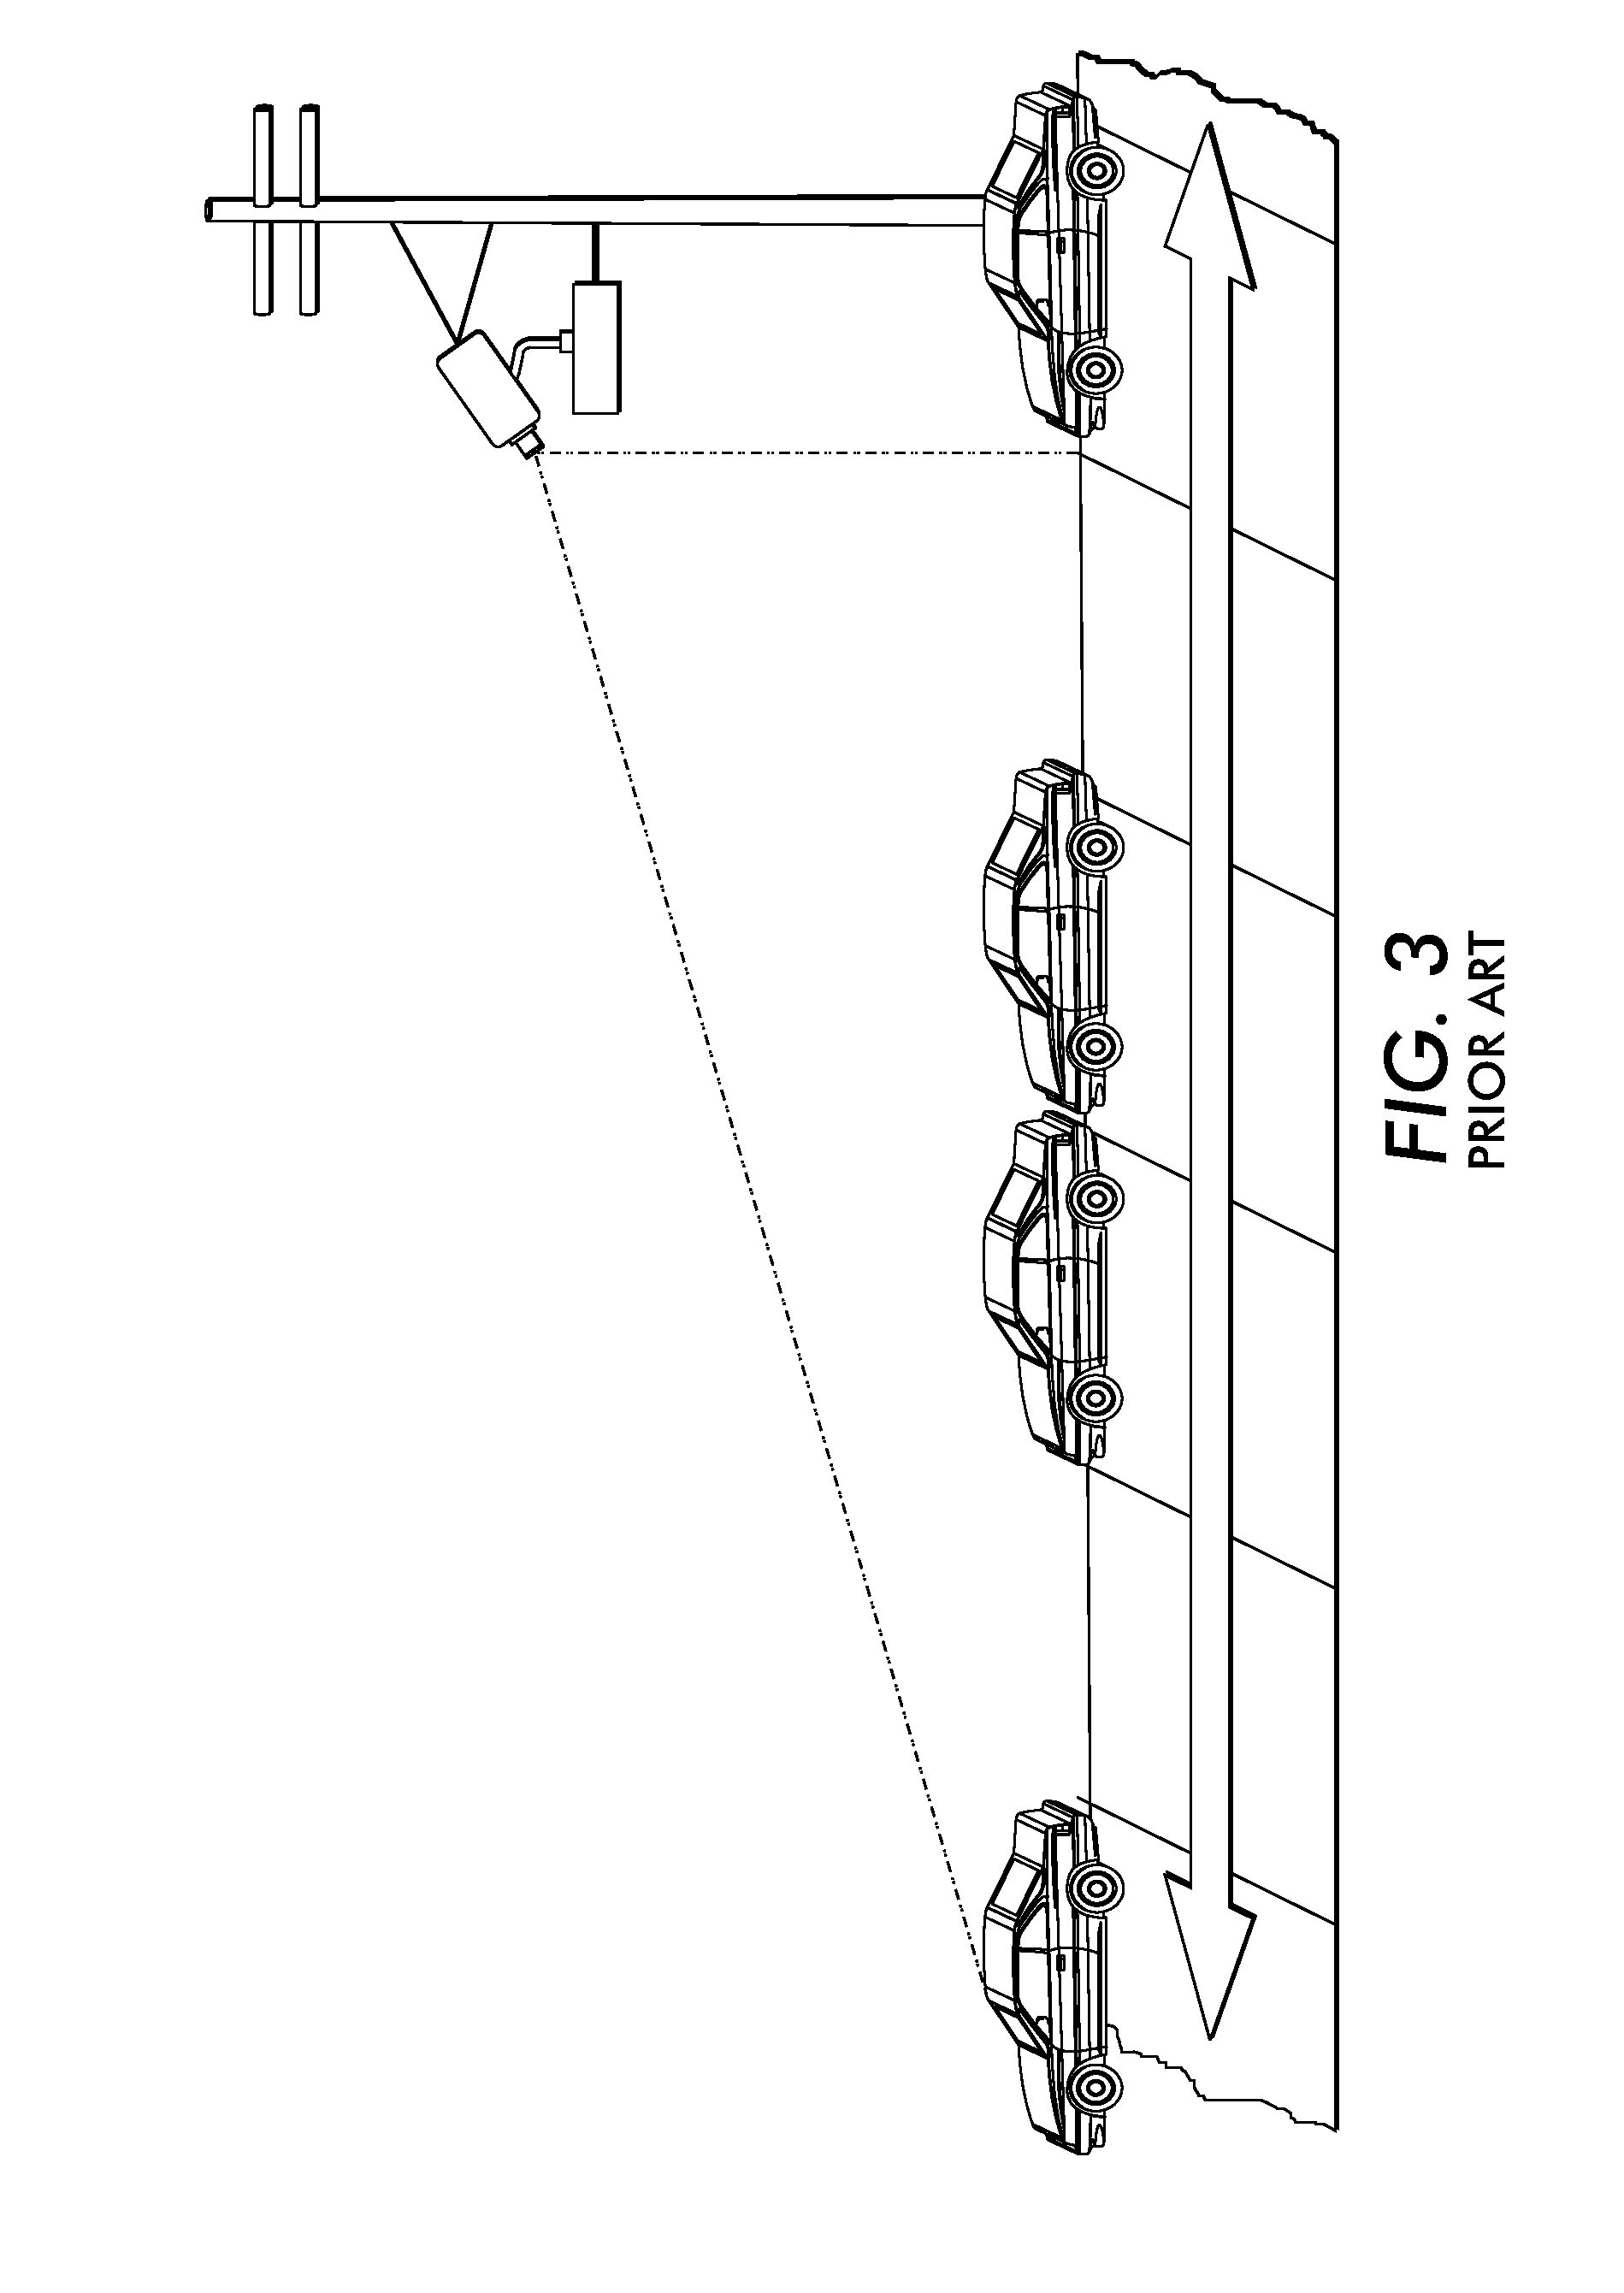 System and method for available parking space estimation for multispace on-street parking